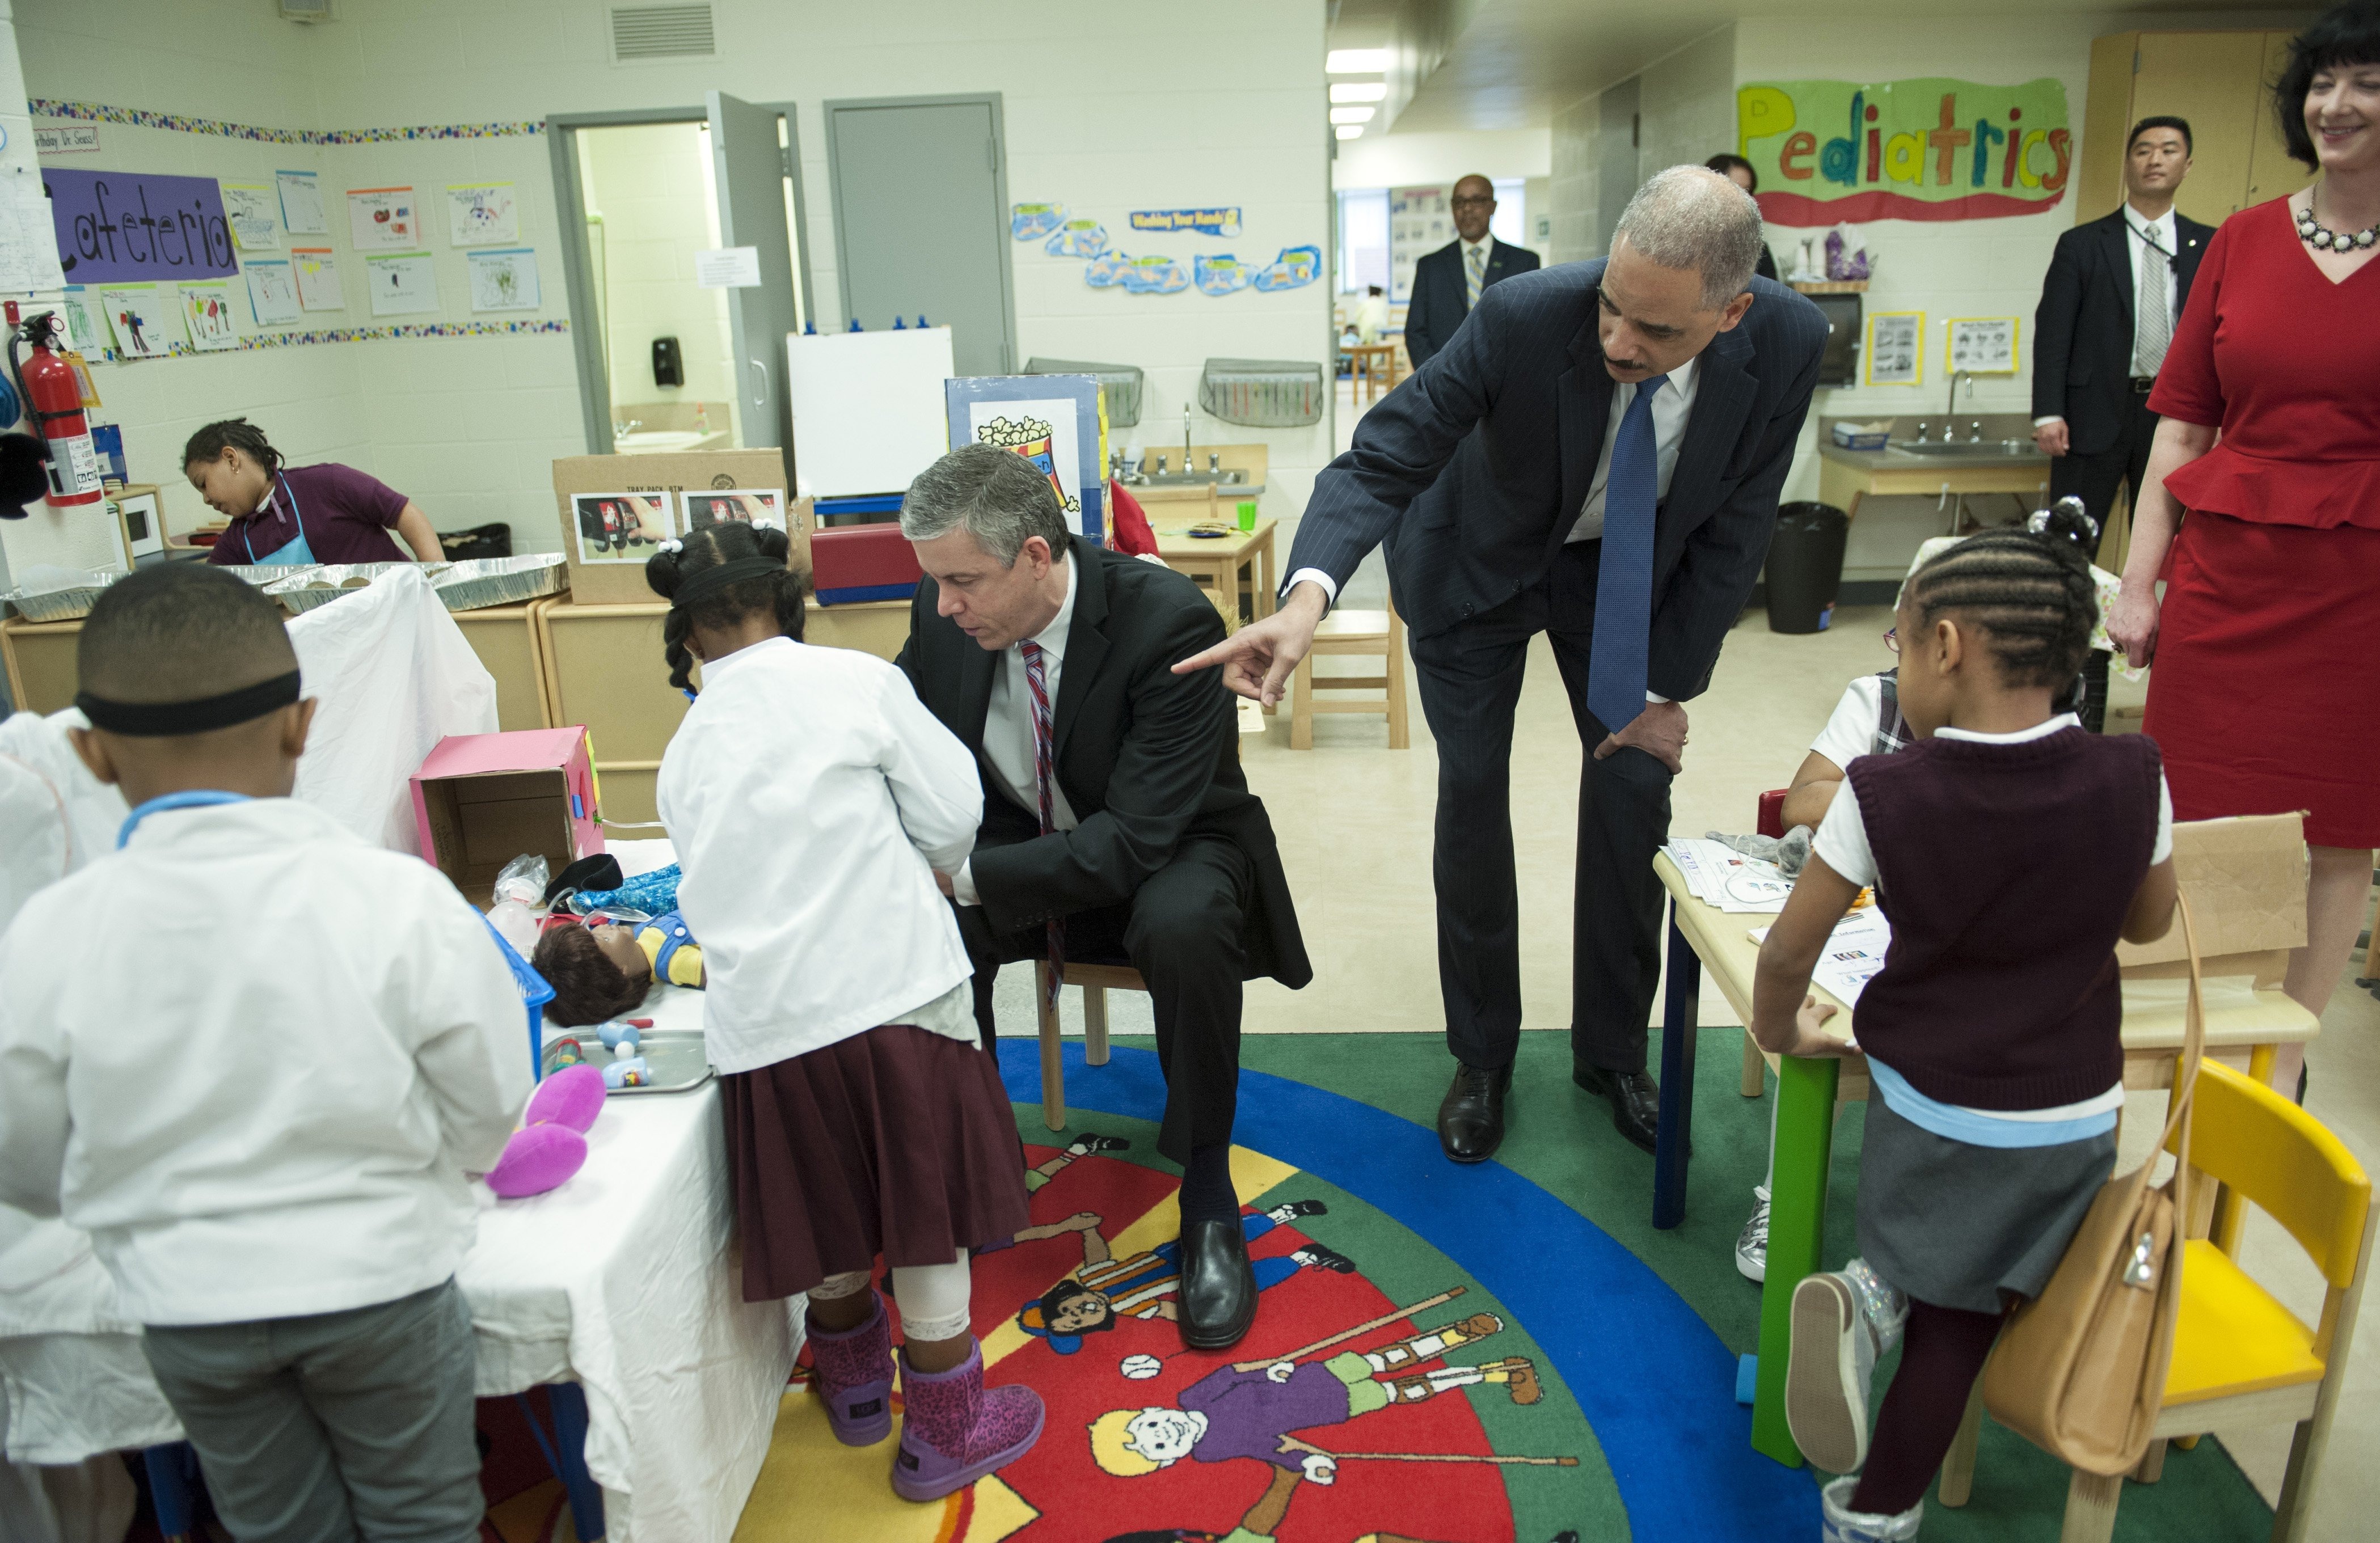 Education Secretary Arne Duncan and Attorney General Eric Holder meet with a preschool class prior to participating in a discussion on the importance of universal access to preschool at J. Ormond Wilson Elementary School in Washington, March 21, 2014. (Cliff Owen&amp;mdash;AP)